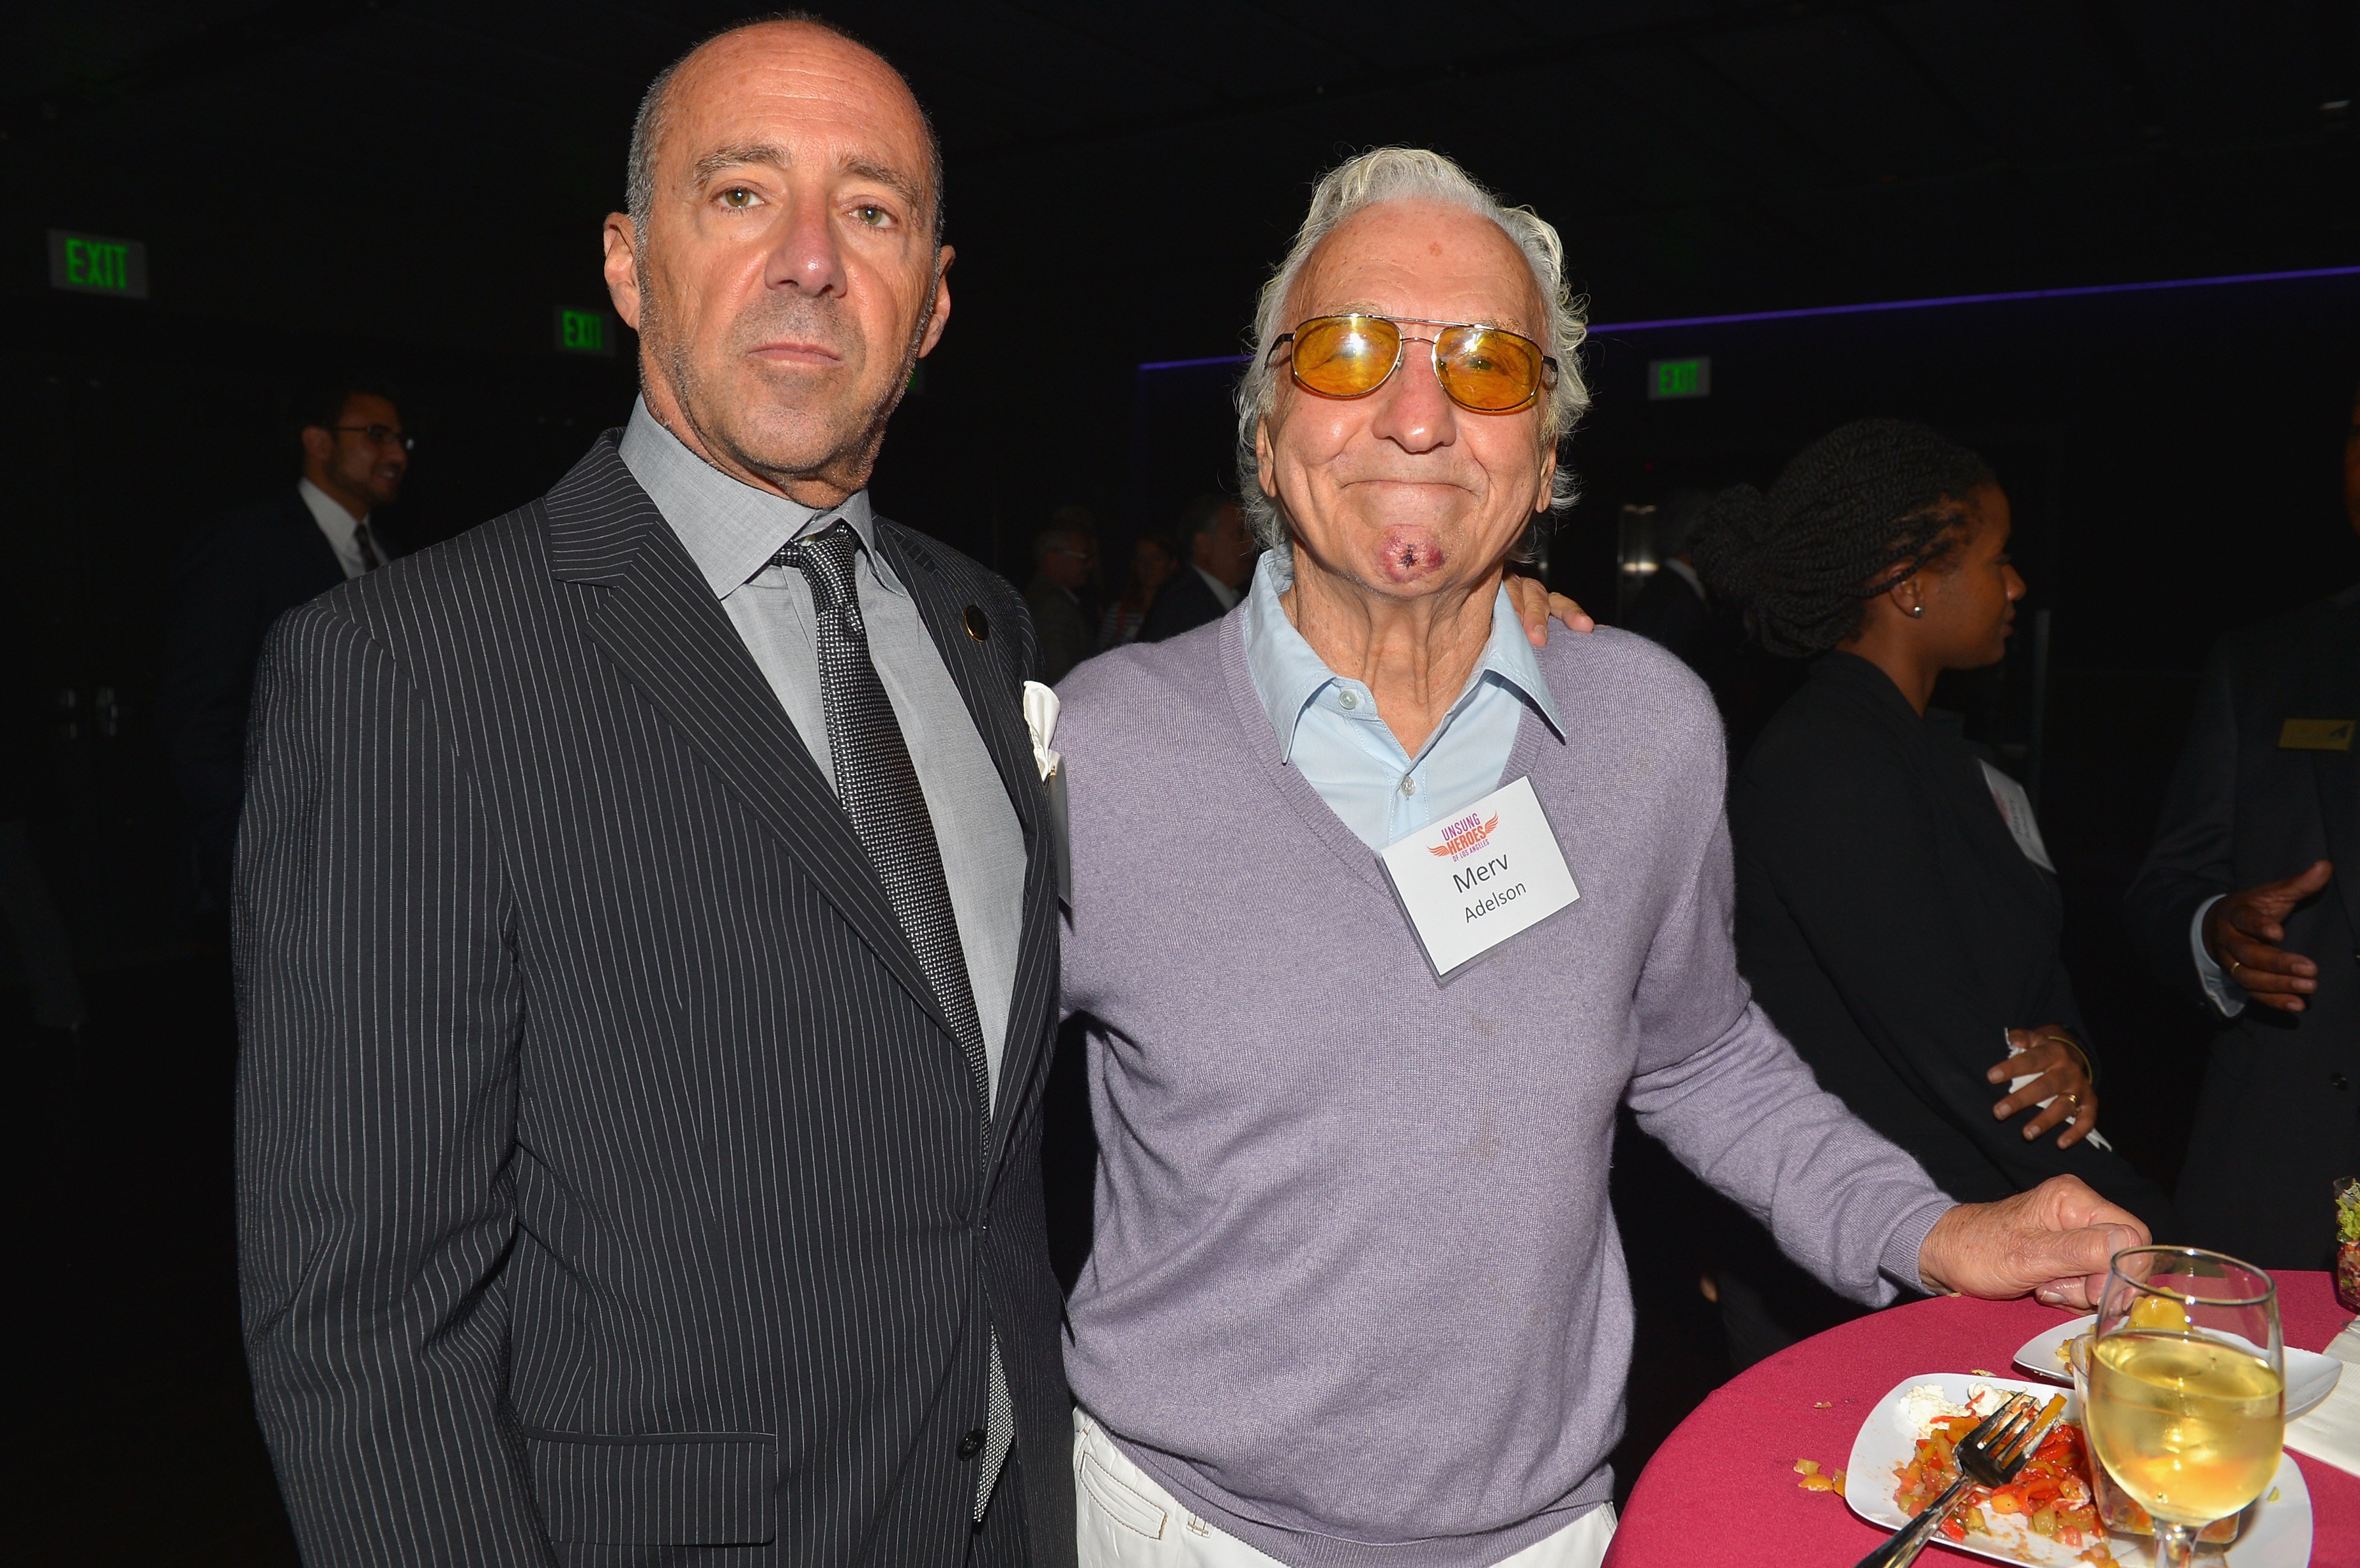 Bob Beitcher and Merv Adelson at the Unsung Heroe Awards at Club Nokia on October 9, 2013 in Los Angeles, California. | Source: Getty Images